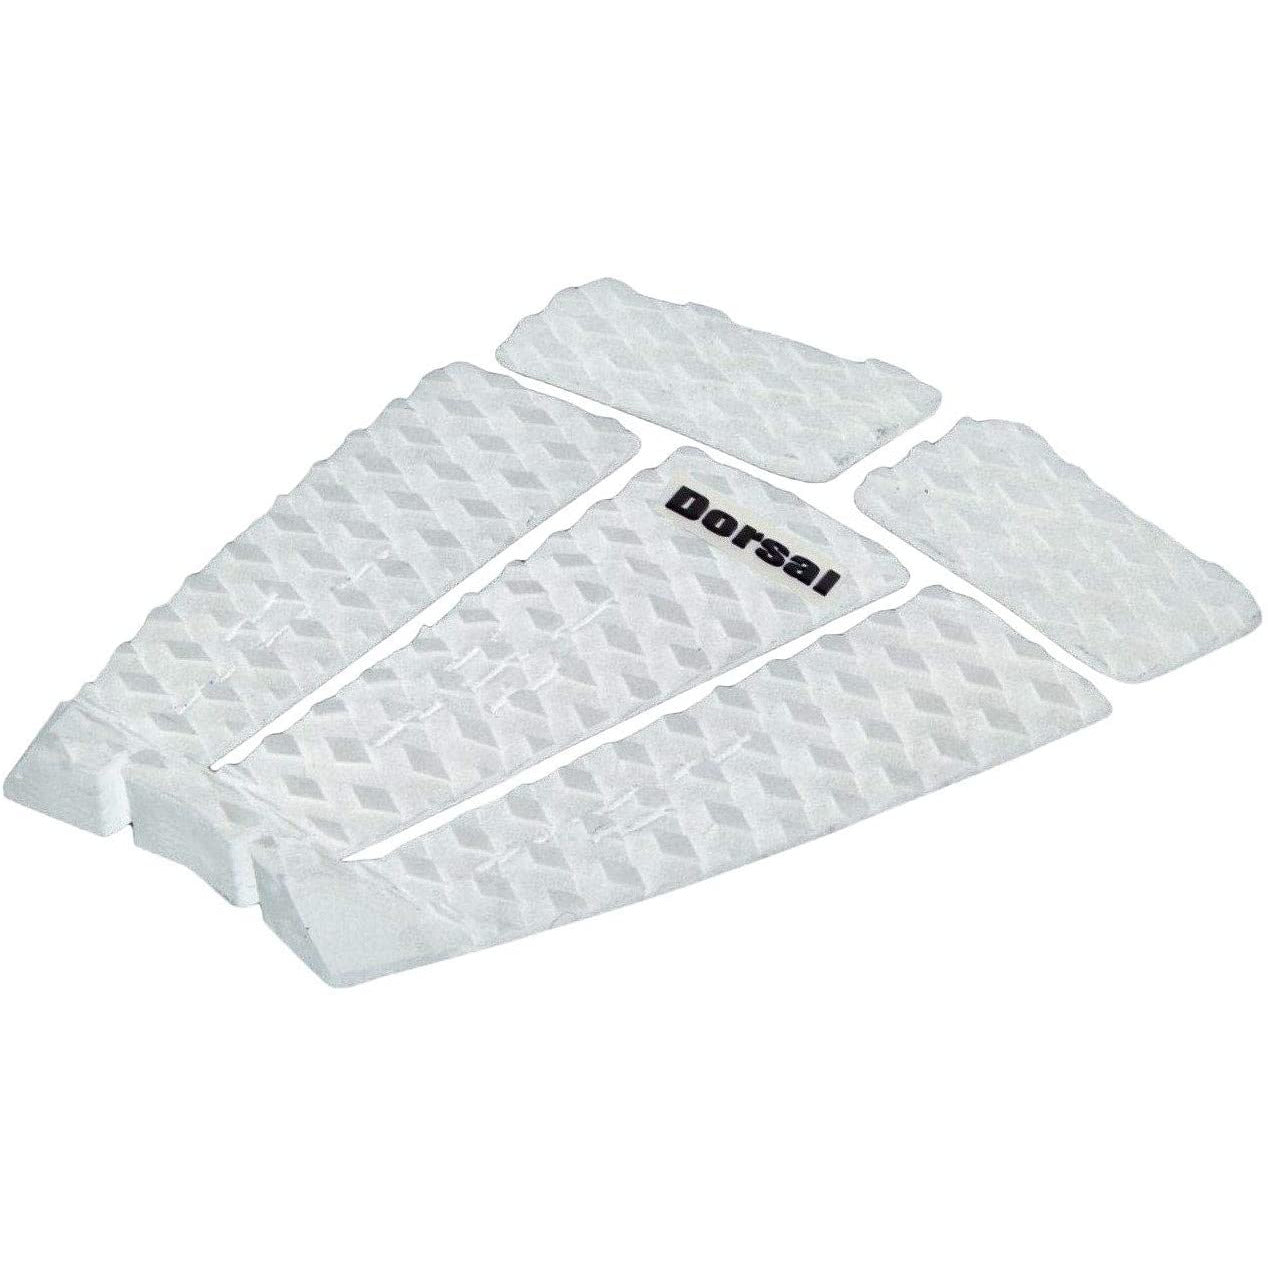 Surfboard Traction Pads with Tail Block